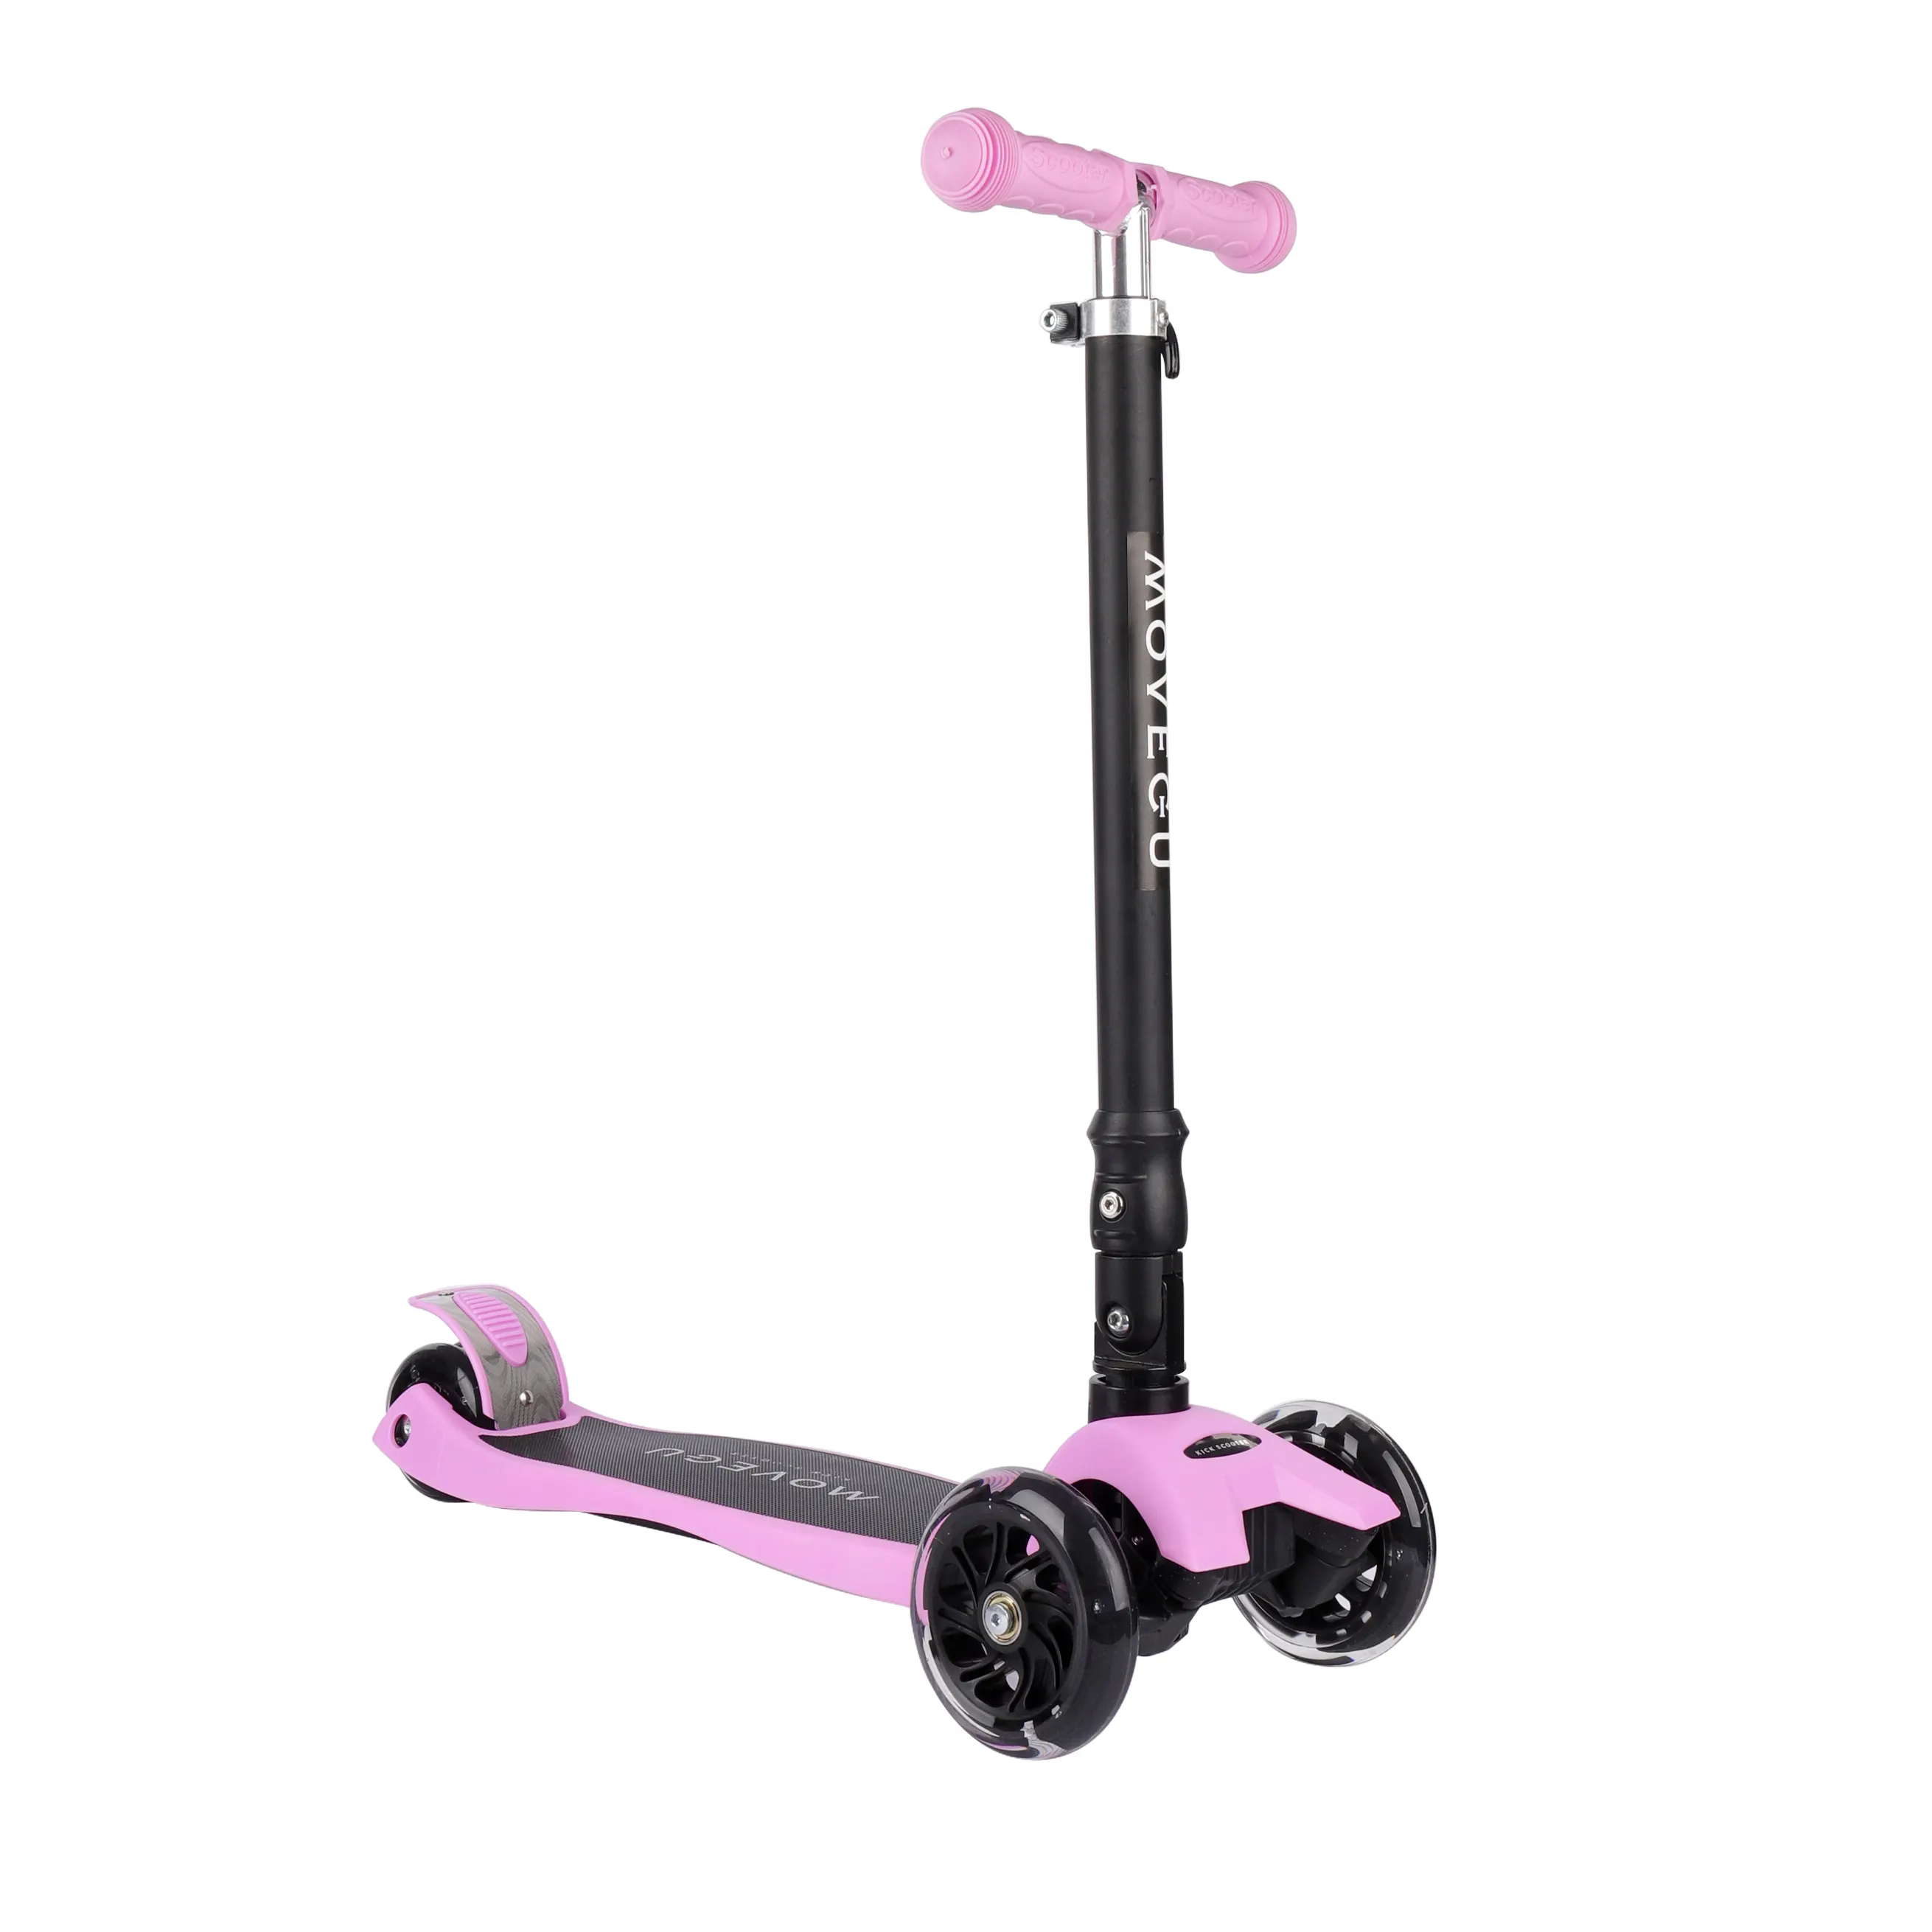 Cheap Children Baby Toy Mini Scooter Flashing Three Wheel Balancing Kids' Scooter Child Scooters